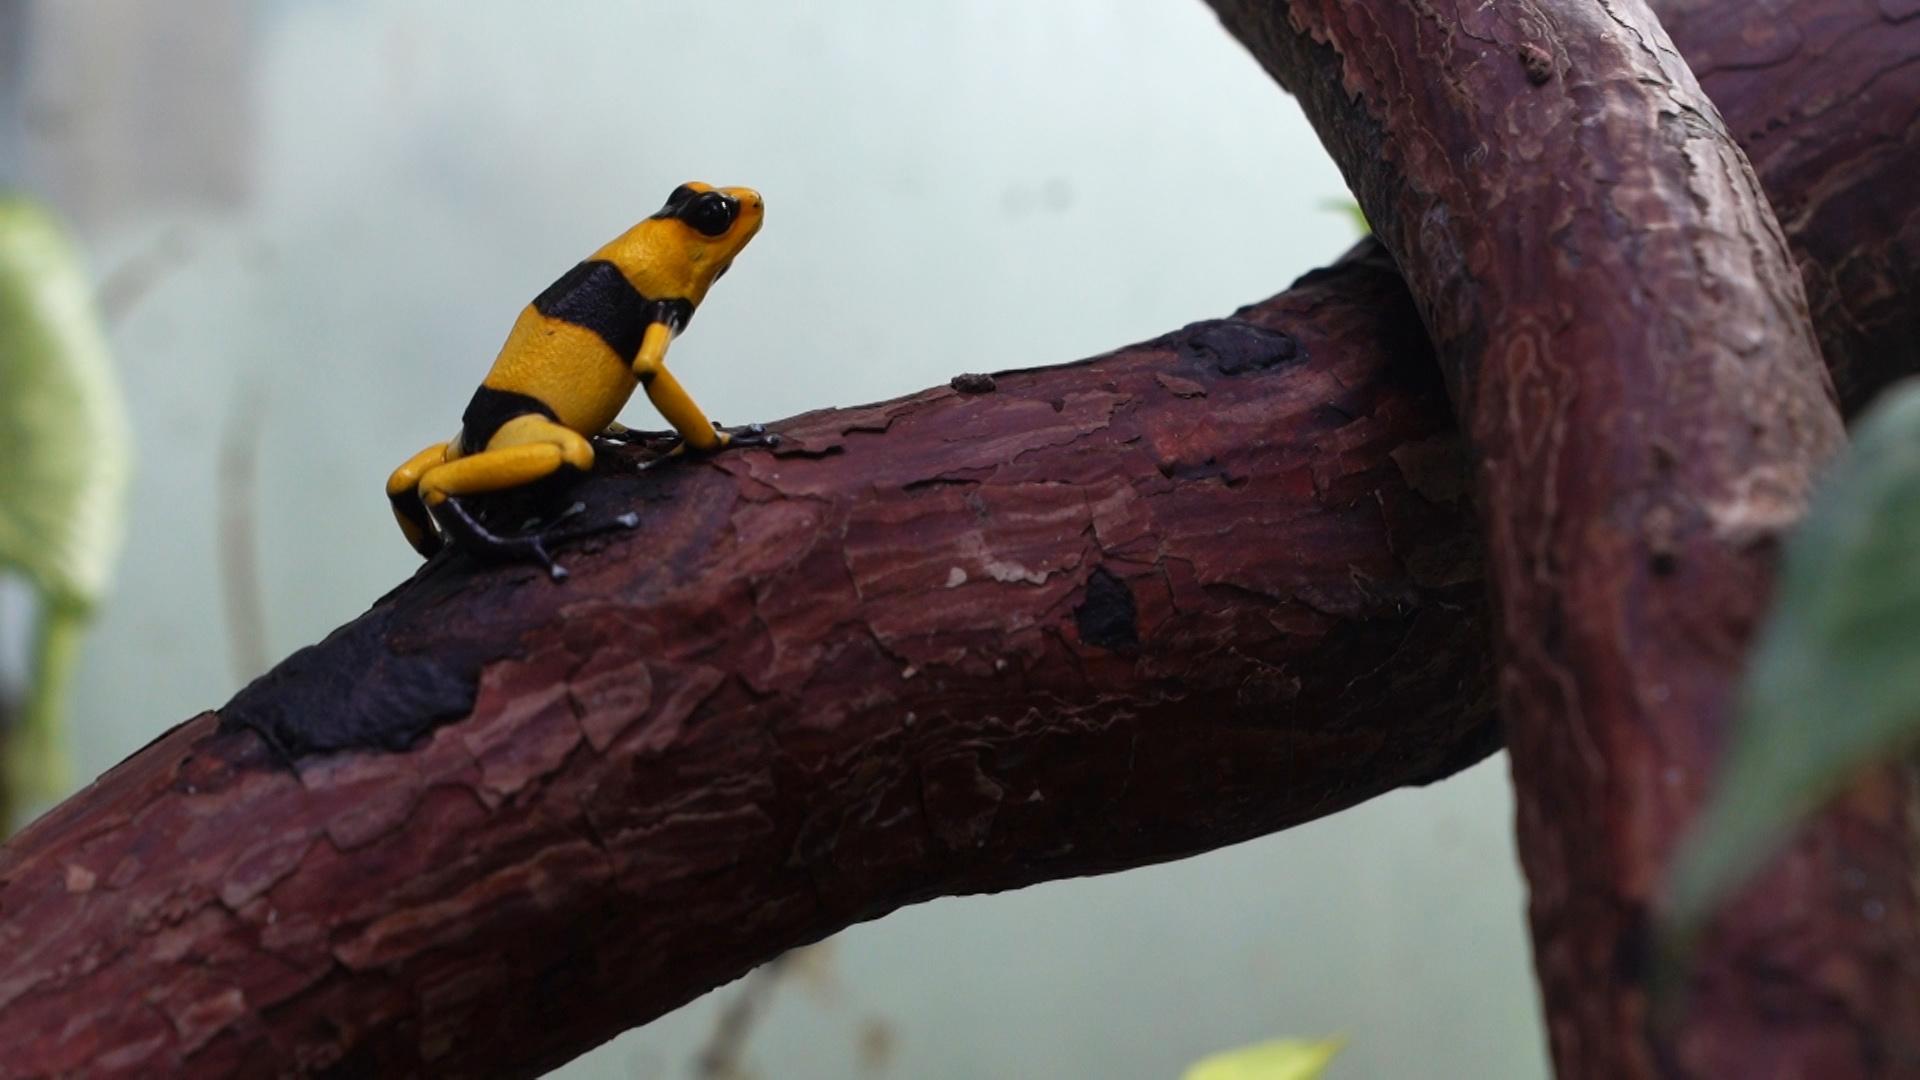 A yellow and black striped frog sits on a branch